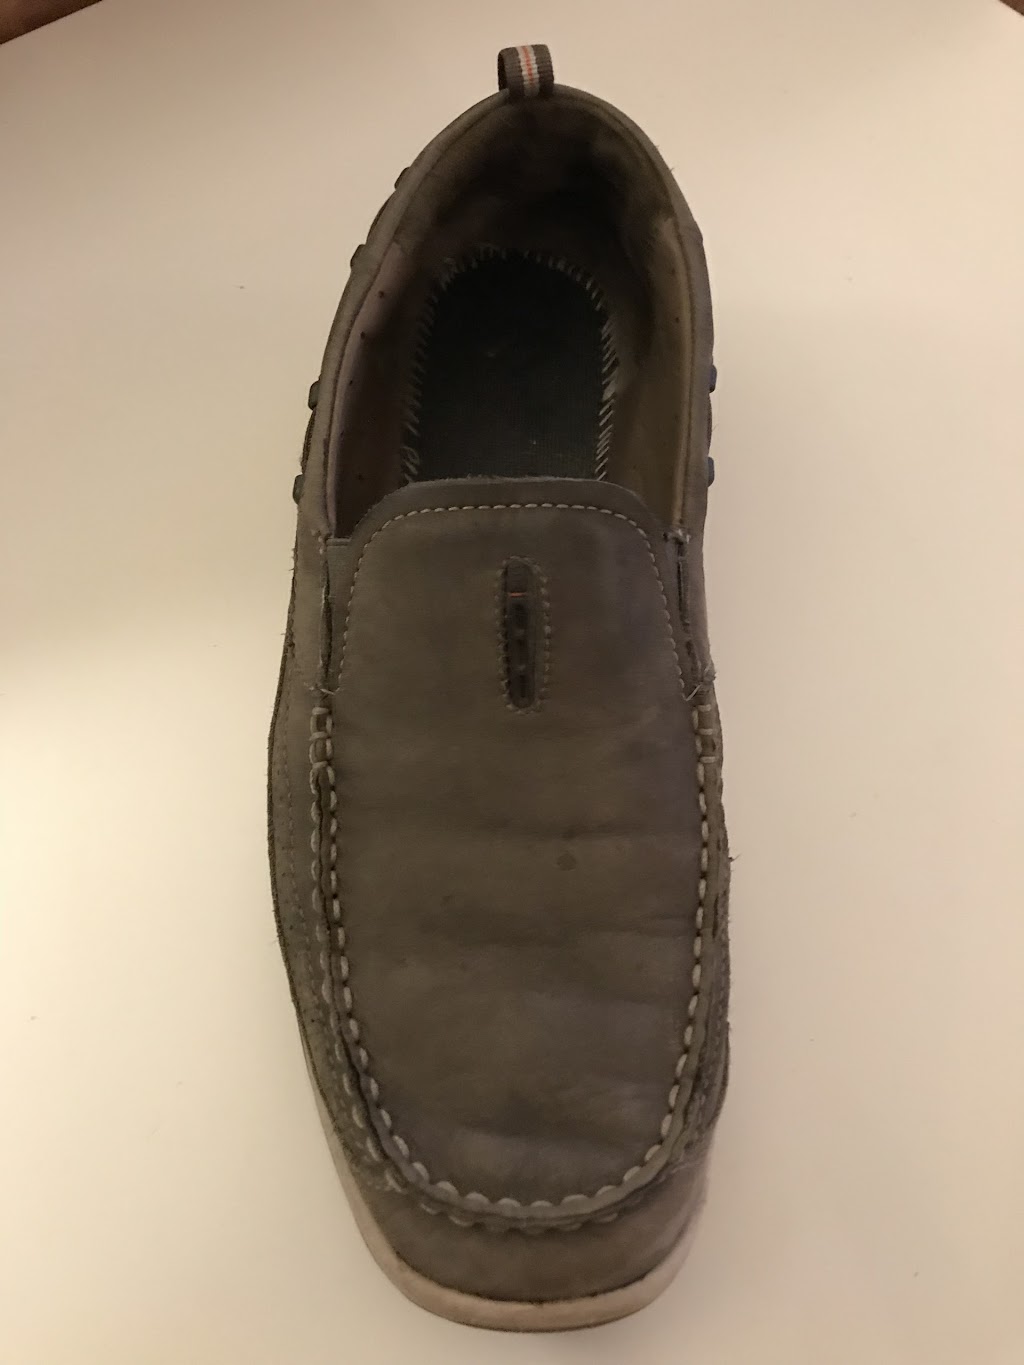 Clarks Of England | 2881 Brighton Road, Oakville, ON L6H 6C9, Canada | Phone: (905) 829-1825